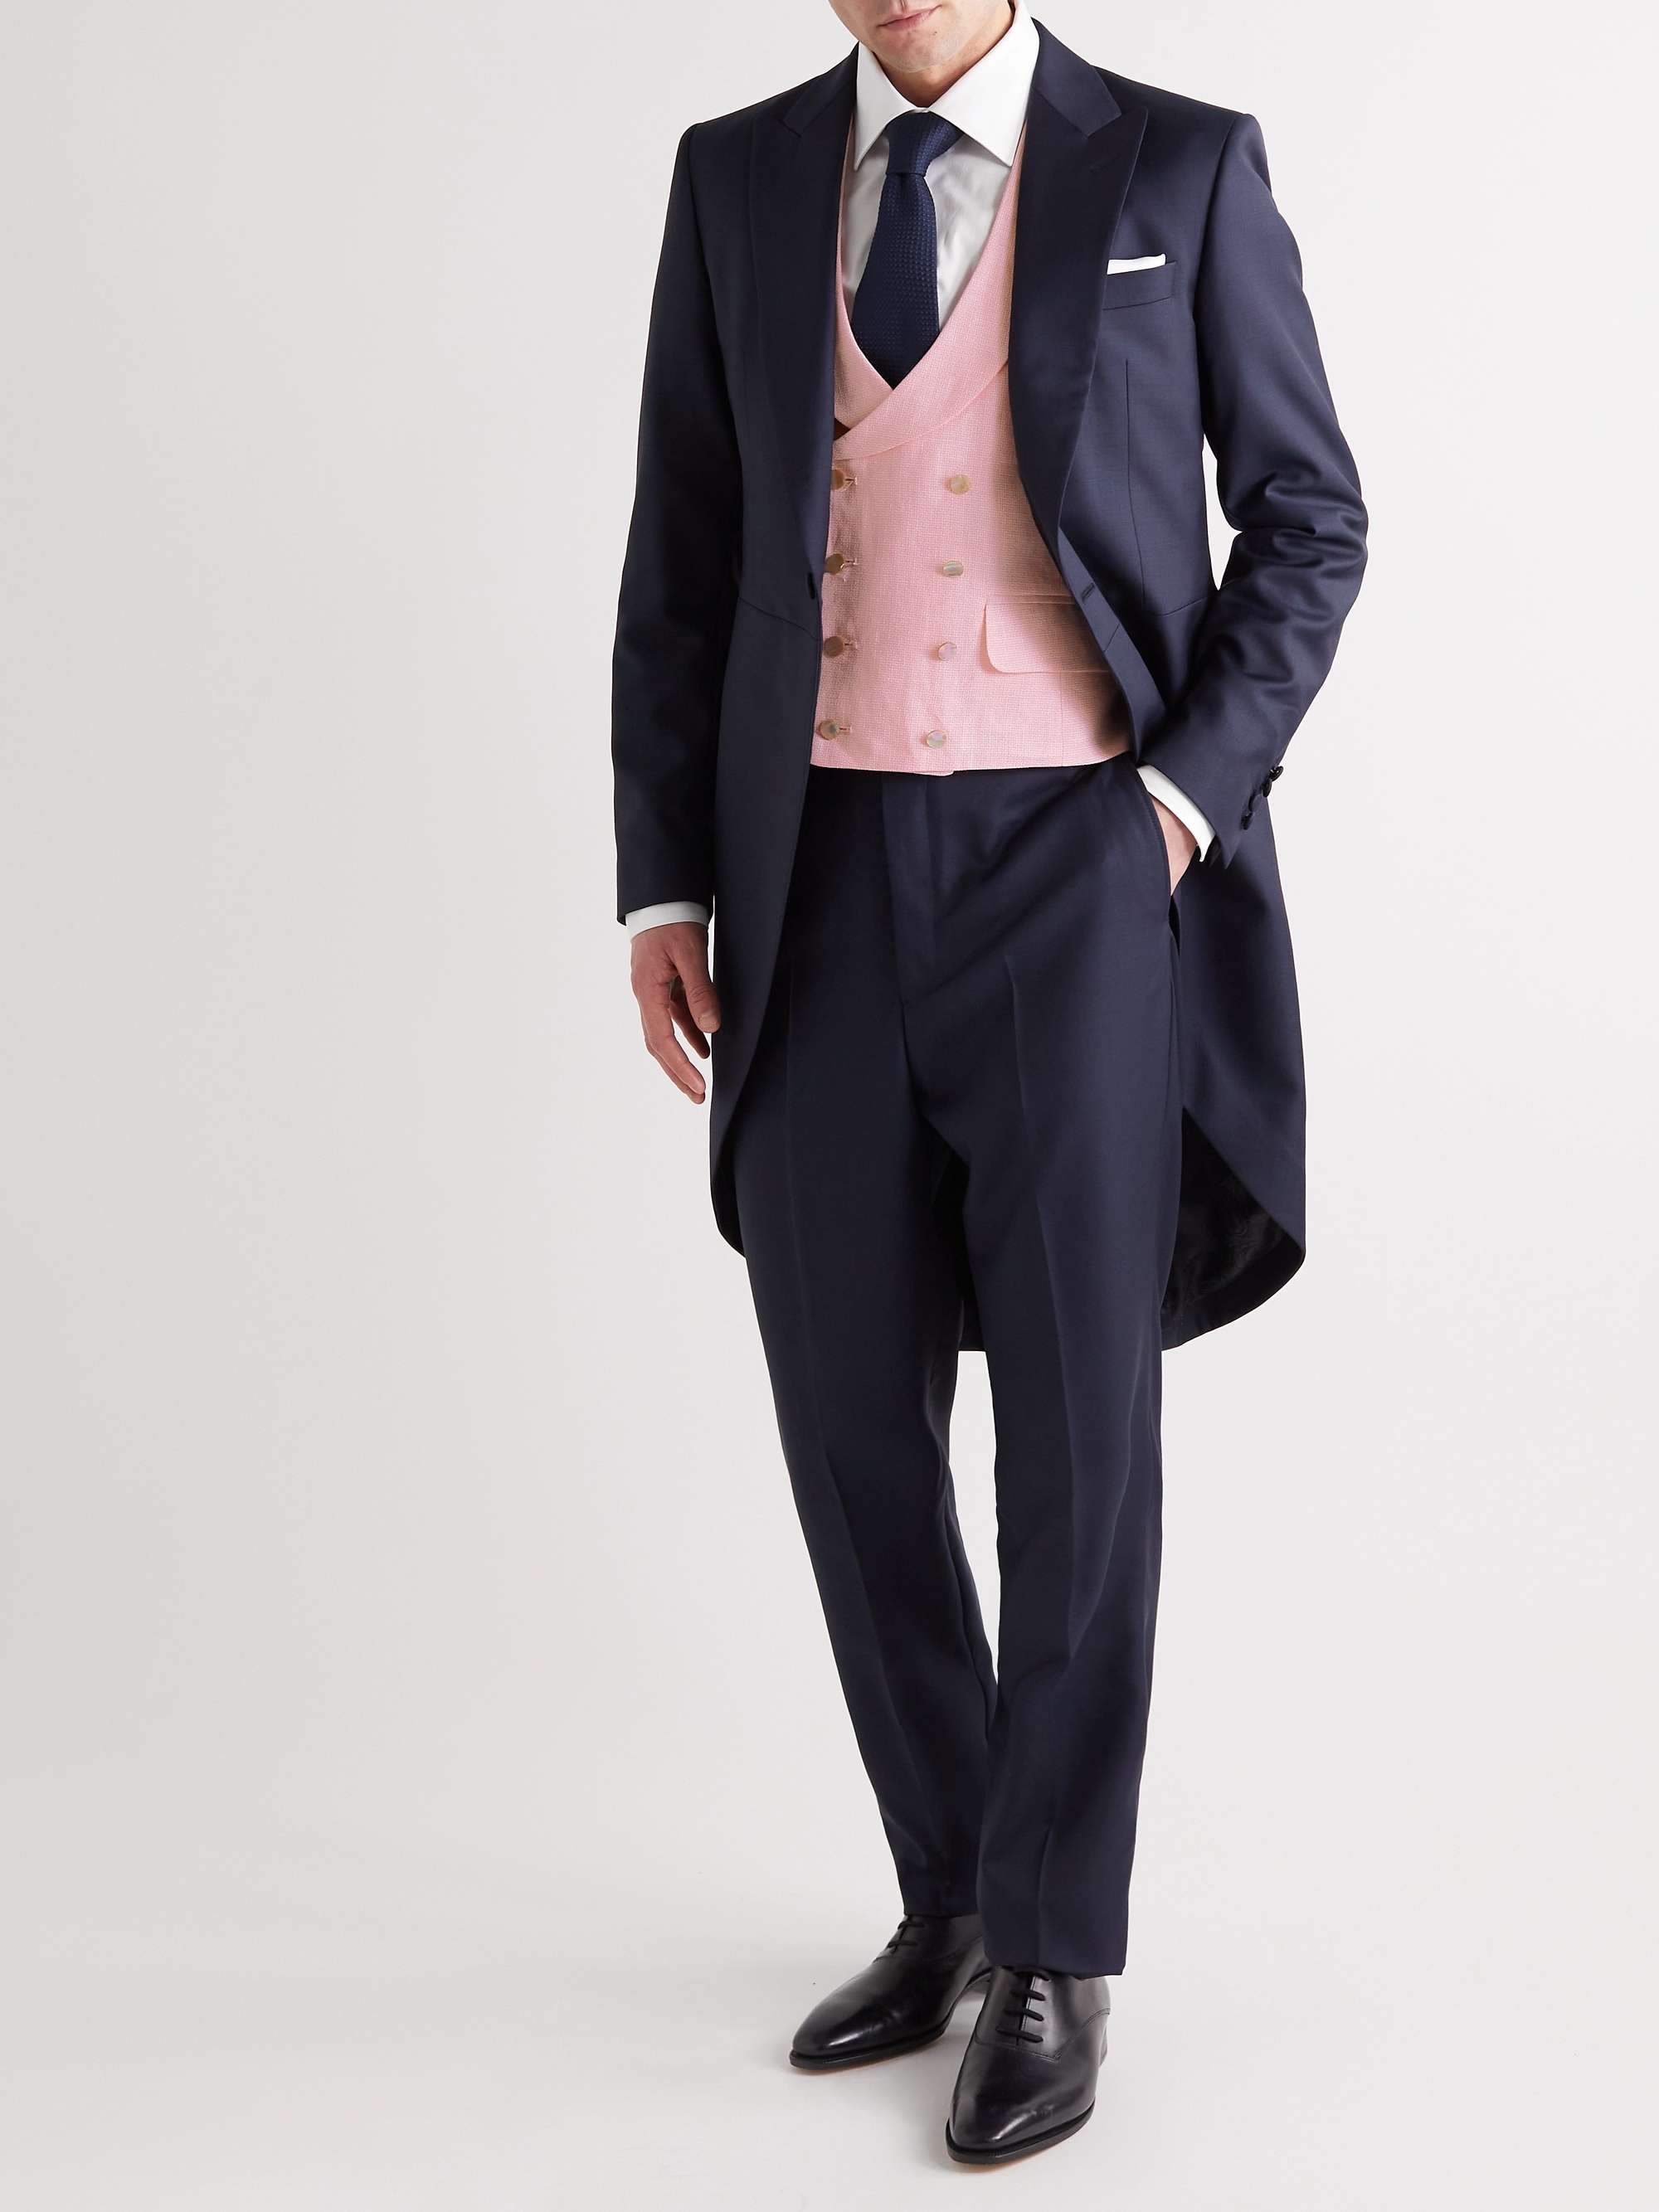 FAVOURBROOK Slim-Fit Double-Breasted Linen-Jacquard Waistcoat